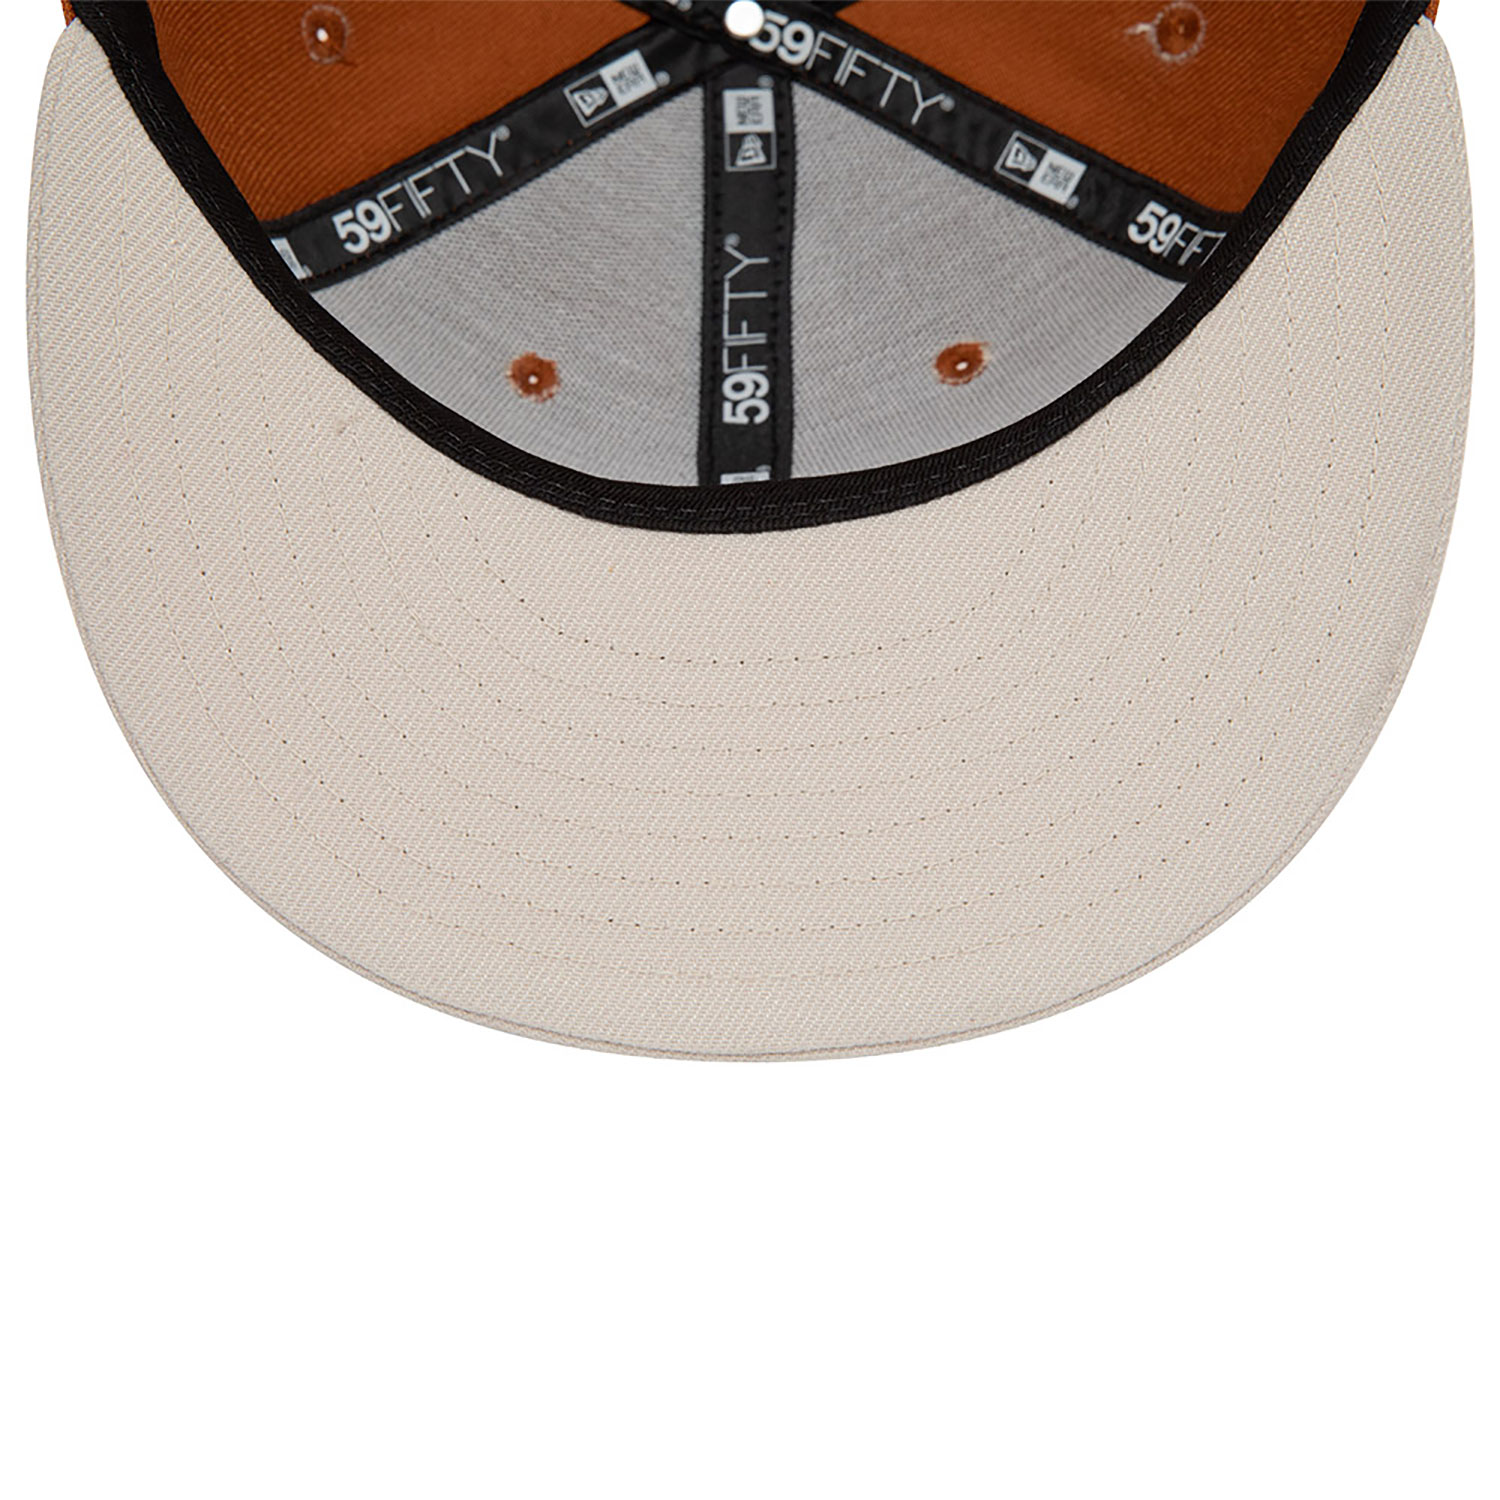 Pittsburgh Pirates Boucle Brown 59FIFTY Fitted Cap